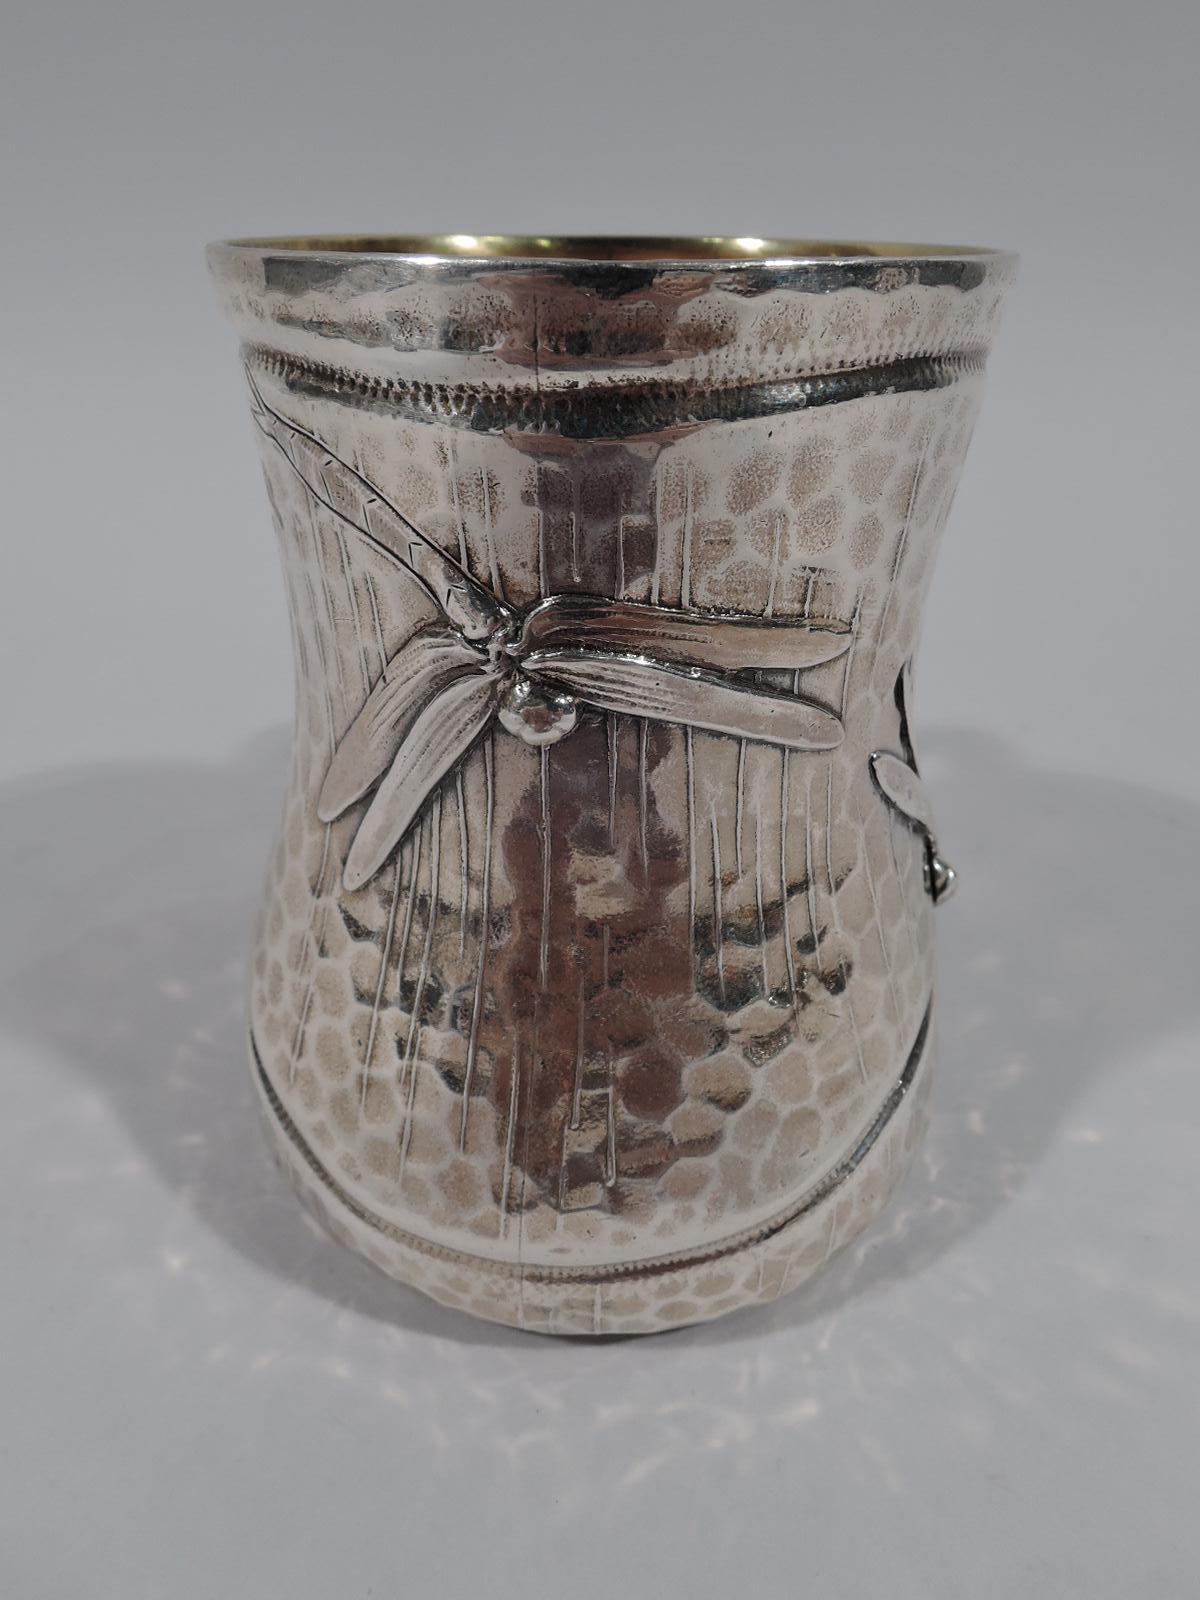 Japonesque sterling silver christening mug. Made by Tiffany & Co. in New York, circa 1879. Baluster with C-scroll handle. Acid-etched irregular striation on hand-hammered honeycomb ground. Three dragonflies with applied heads and wings tapering into